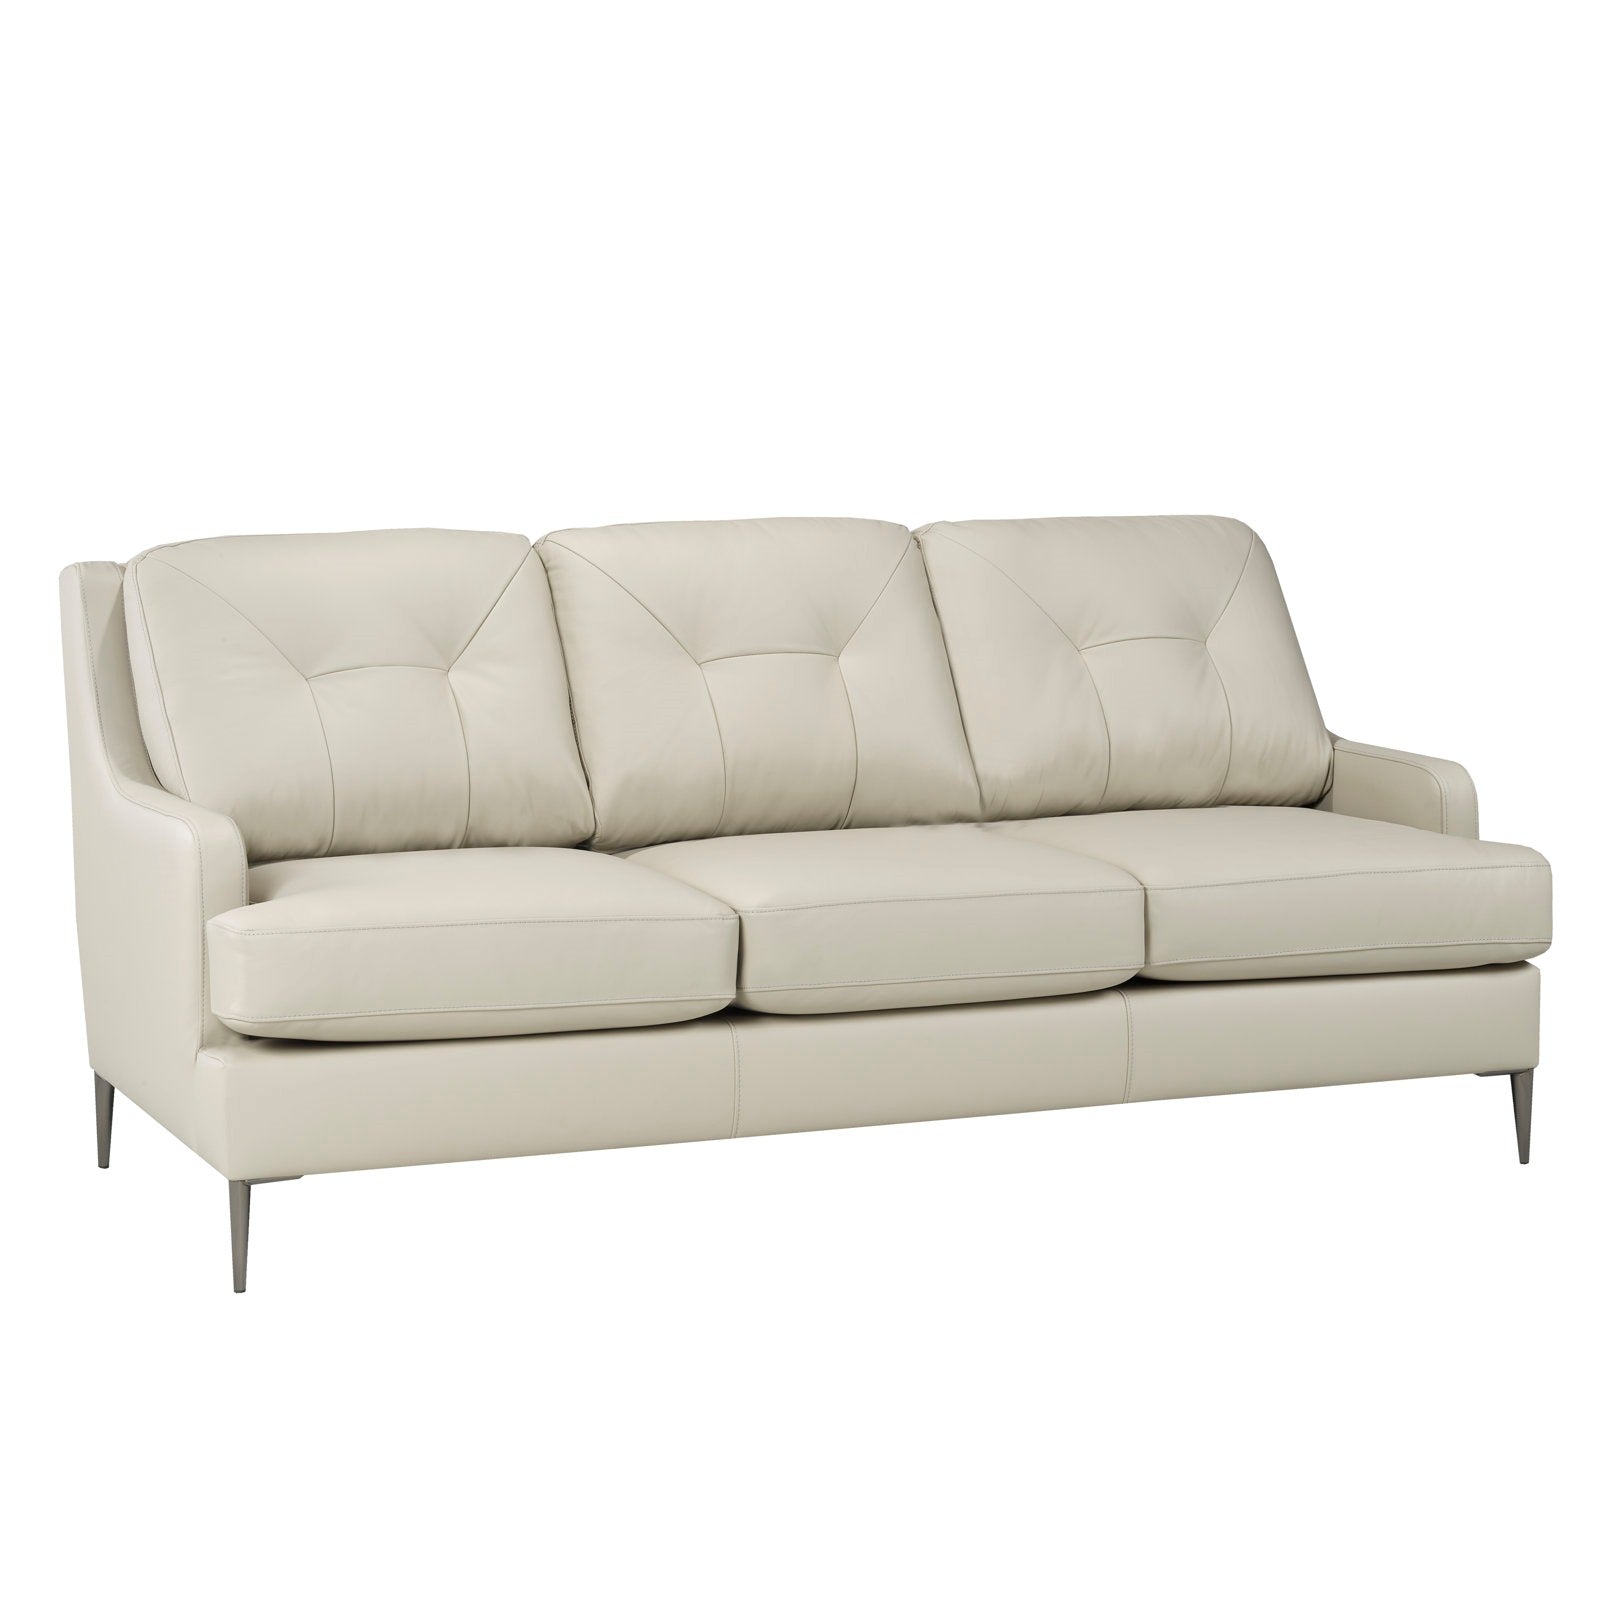 Canadian Made Genuine Leather Florance Linen Sofa Collection 5557